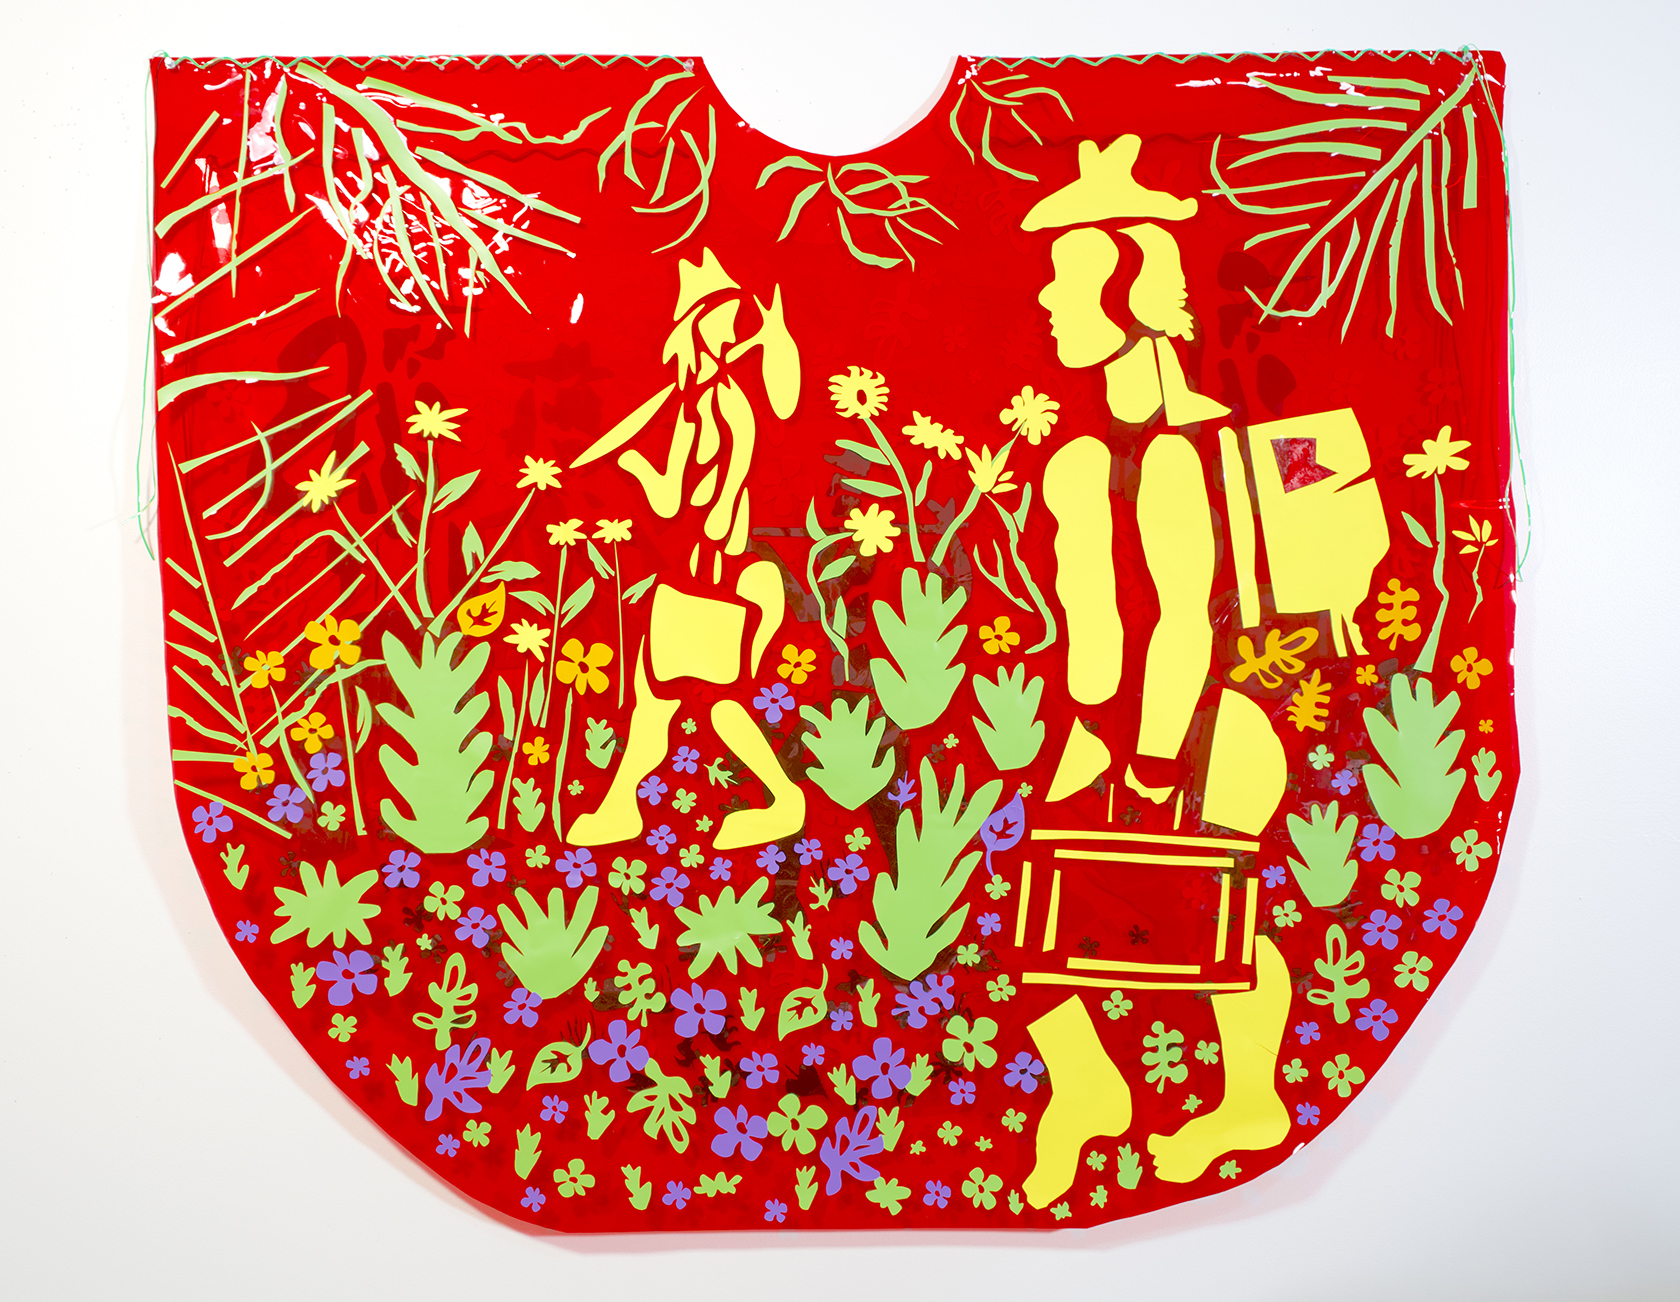 A 2-D mixed-media sculpture features a red background with woodcut-style images of yellow figures walking amid flowers and plants